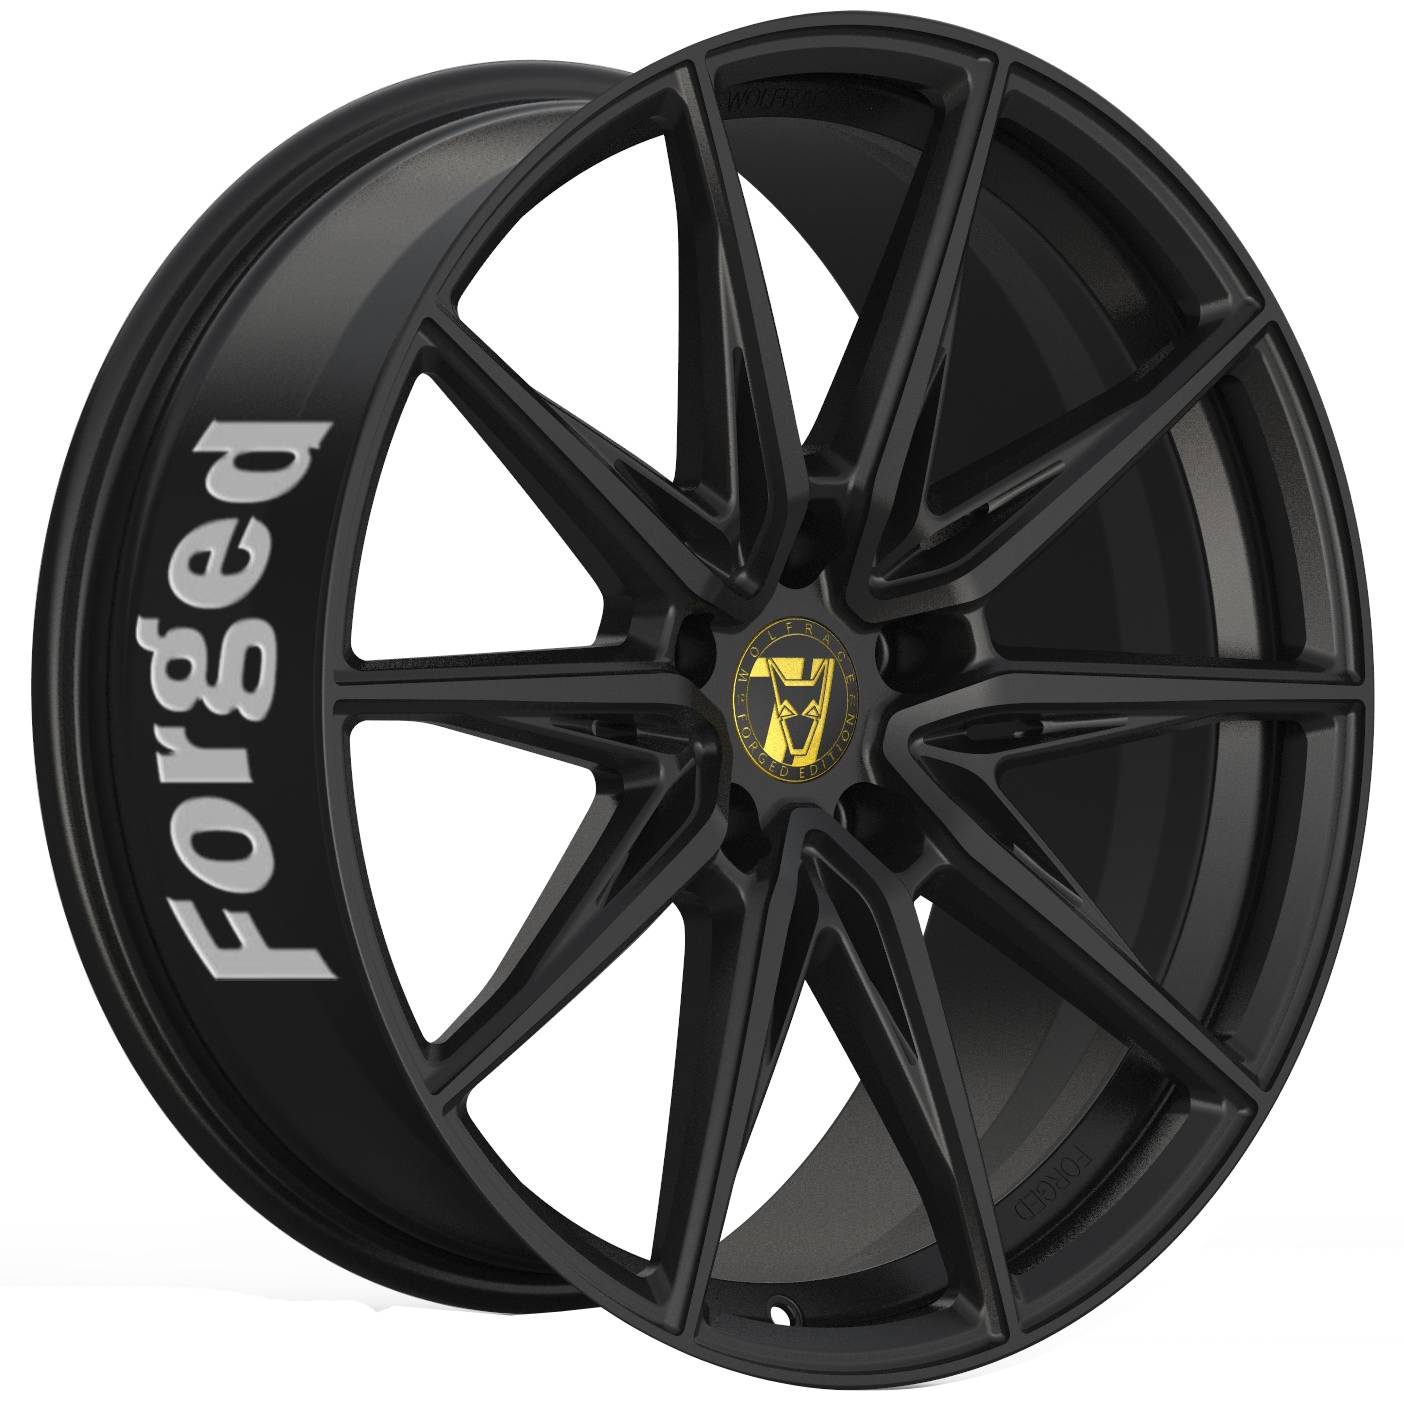 Demon Wheels 71 Forged Edition Urban Racer Forged [13x23] -5x108- ET 40